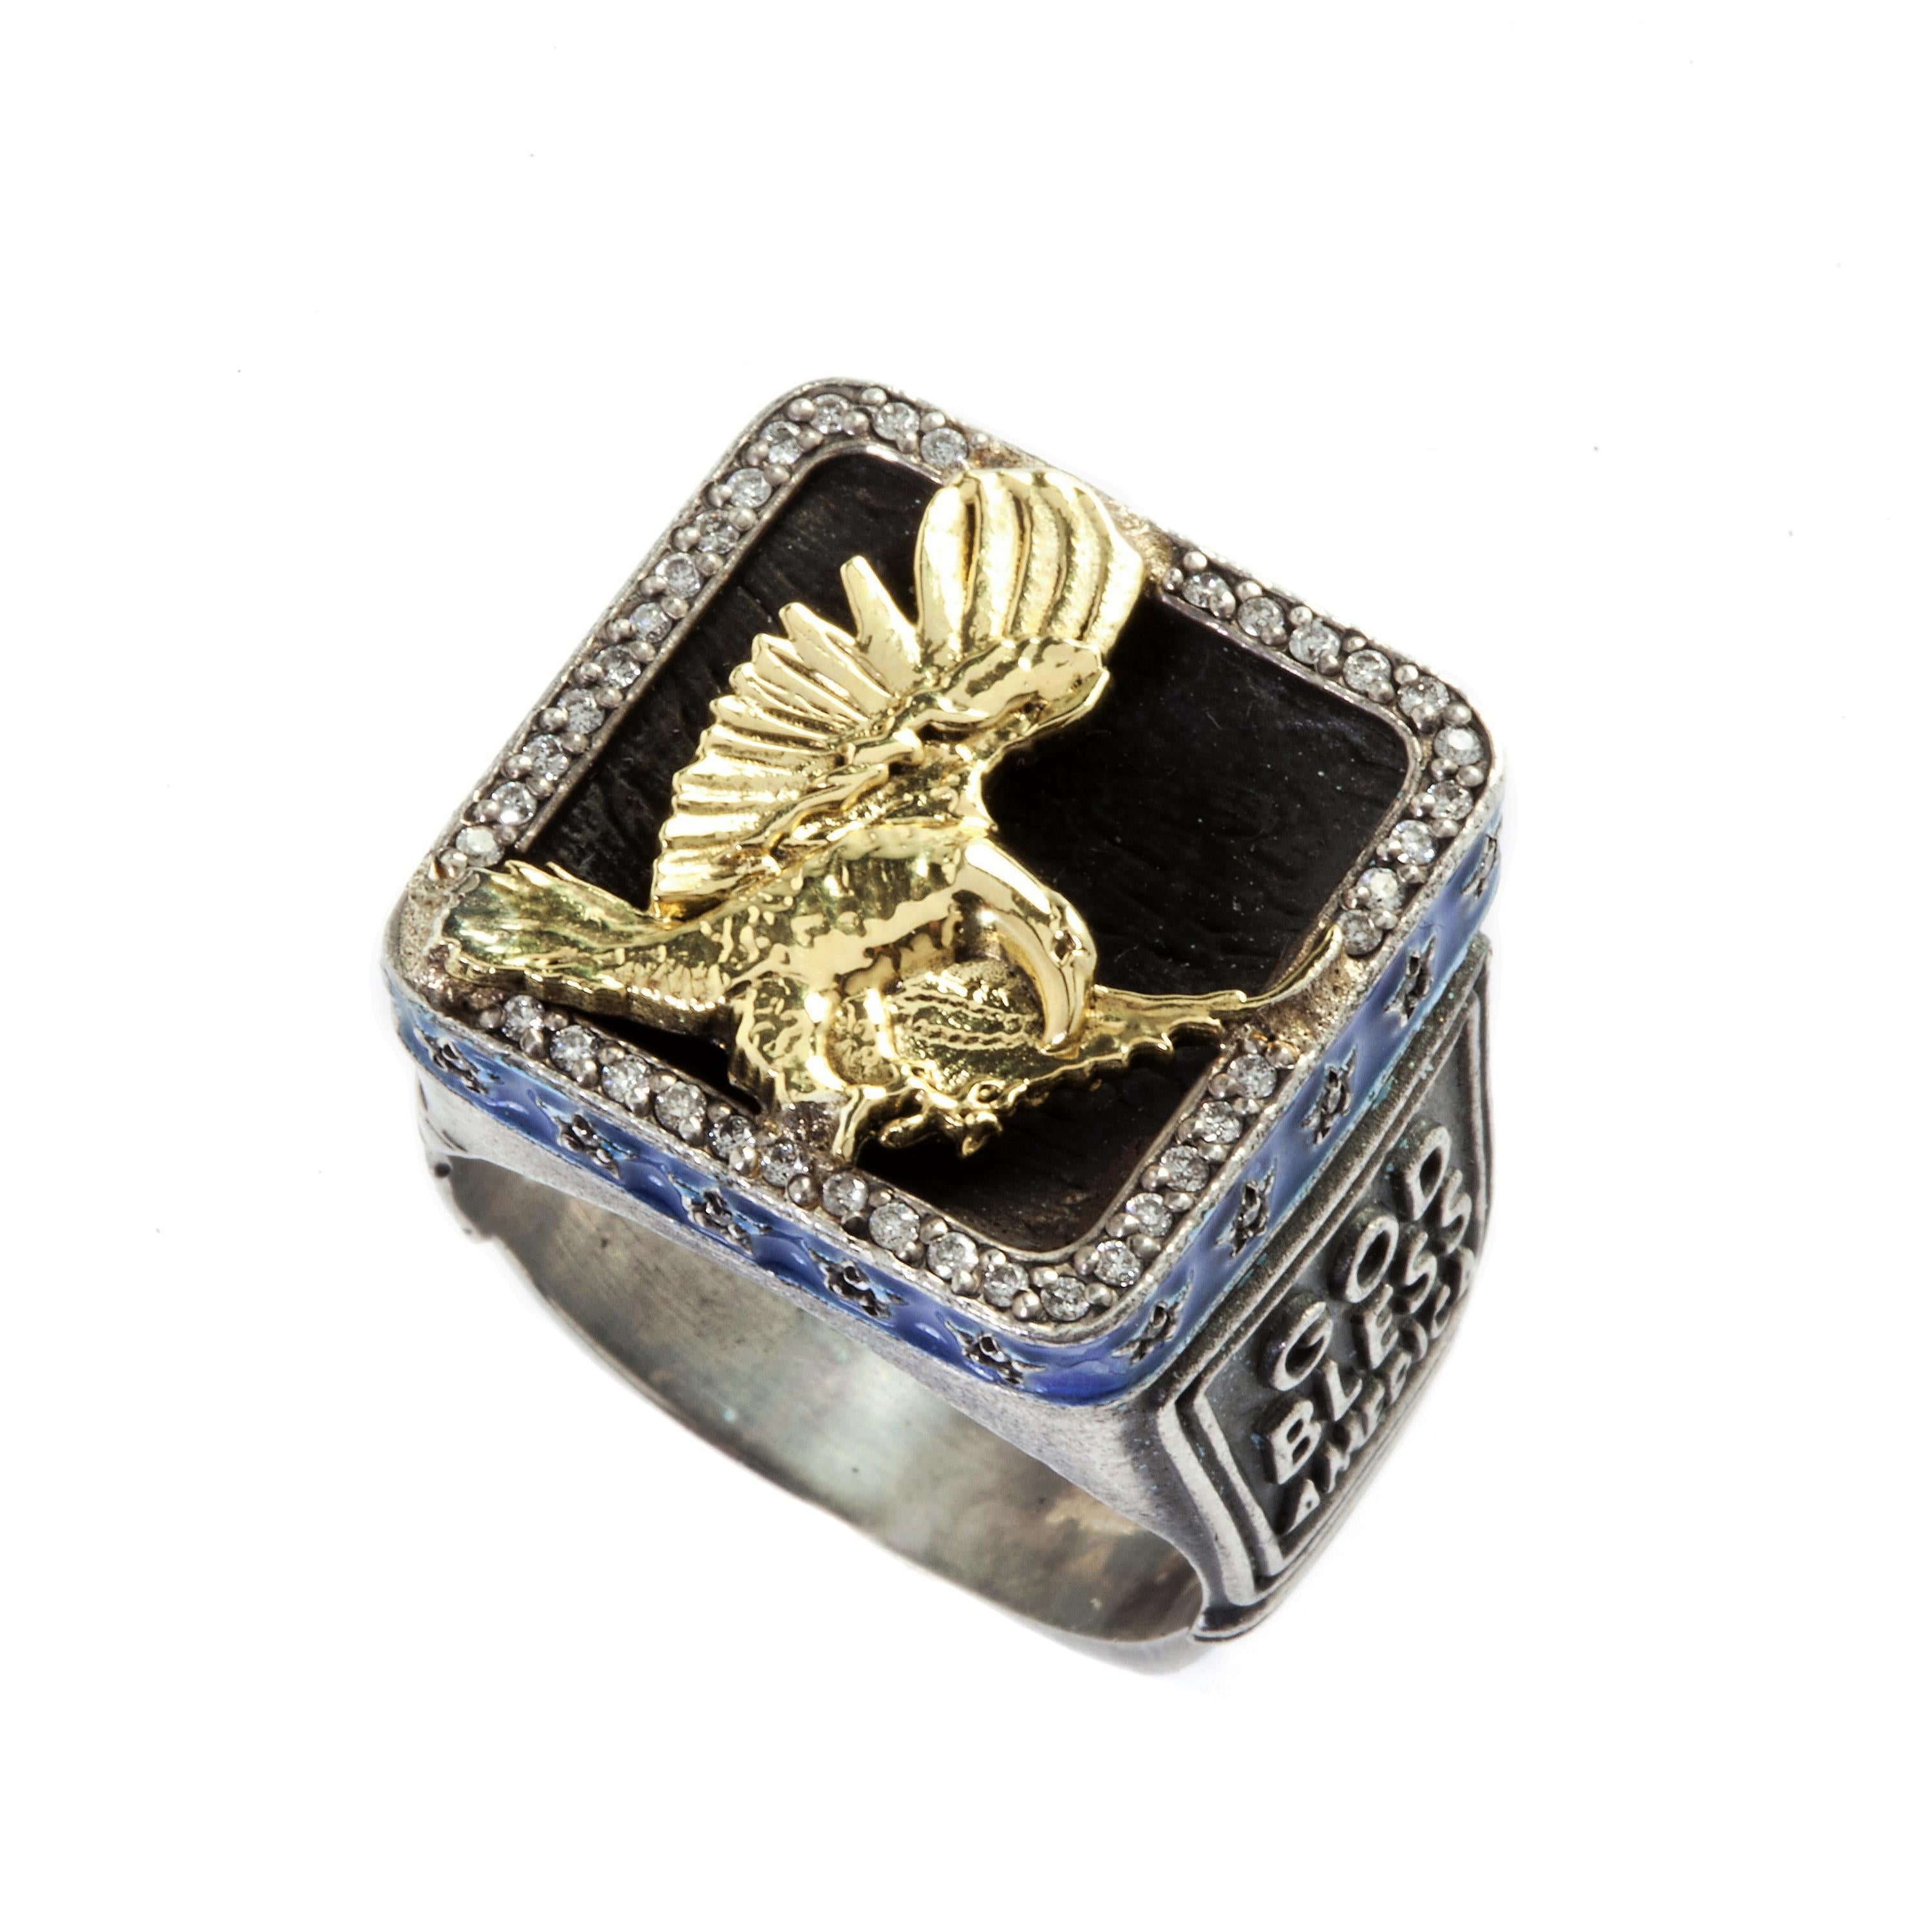 Women's or Men's Bald Eagle USA Ring Sterling Silver and Gold with Diamonds and Enamel Stambolian